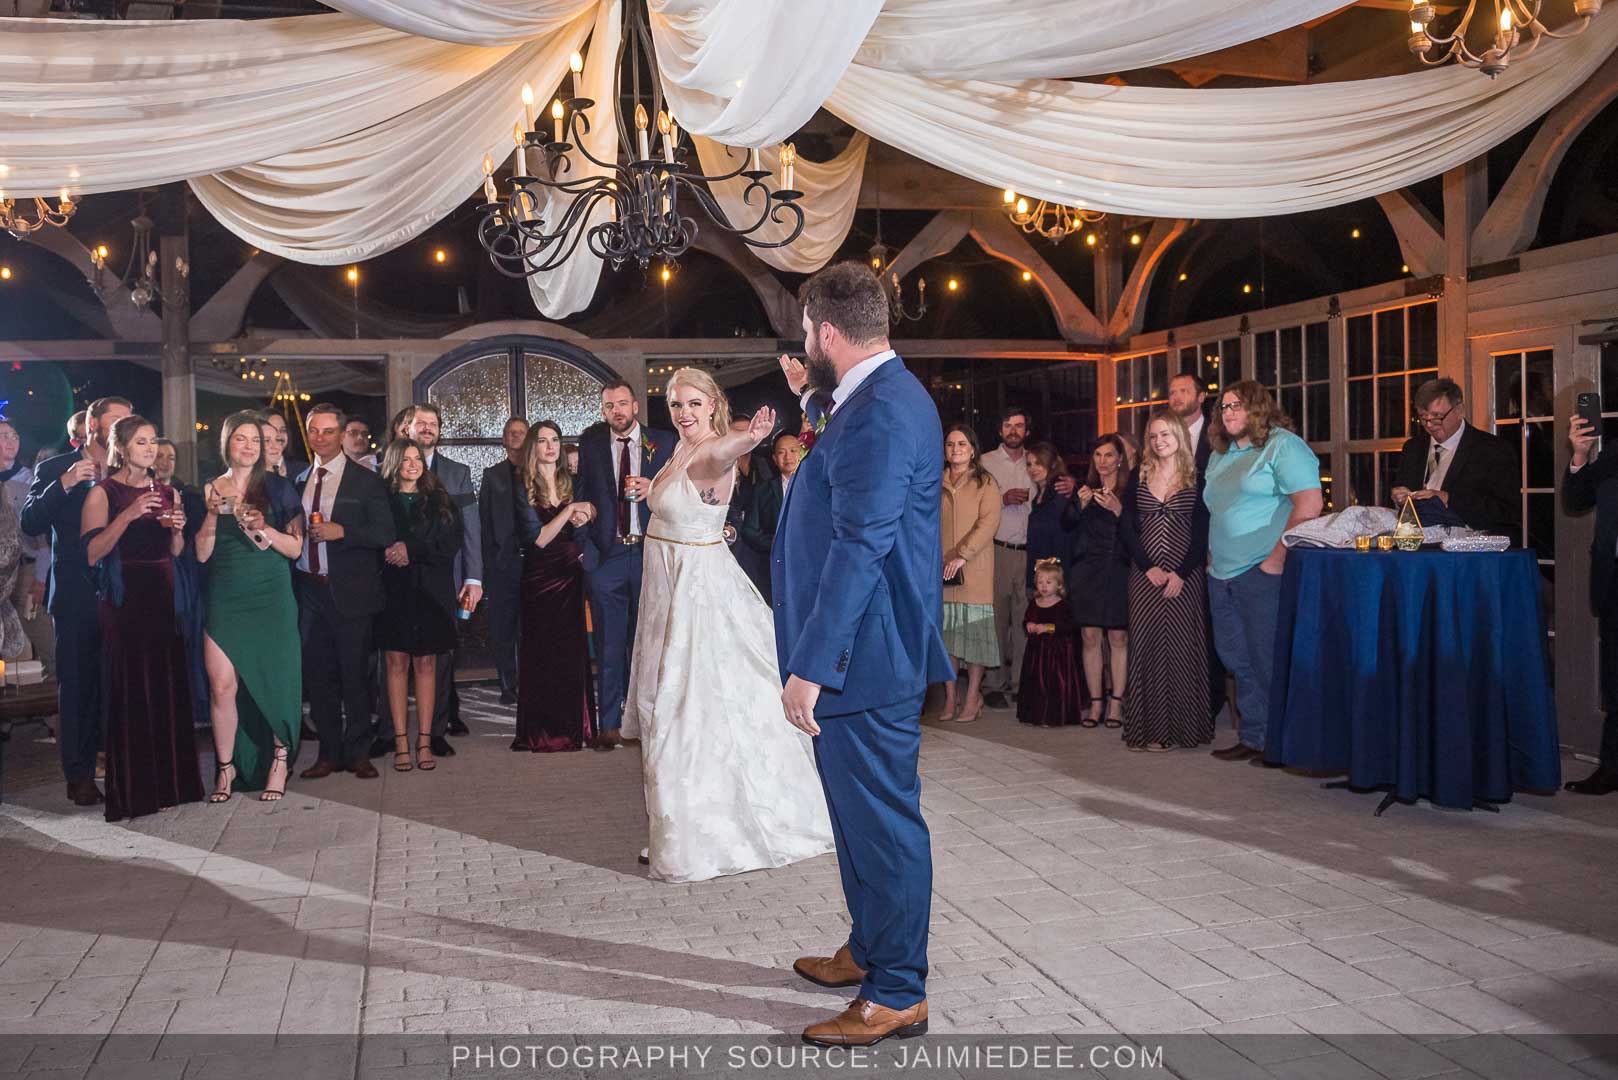 Rocky's Lake Estate Wedding Venue - reception - bride and groom's first dance together as husband and wife inside pavilion with ceiling drapes